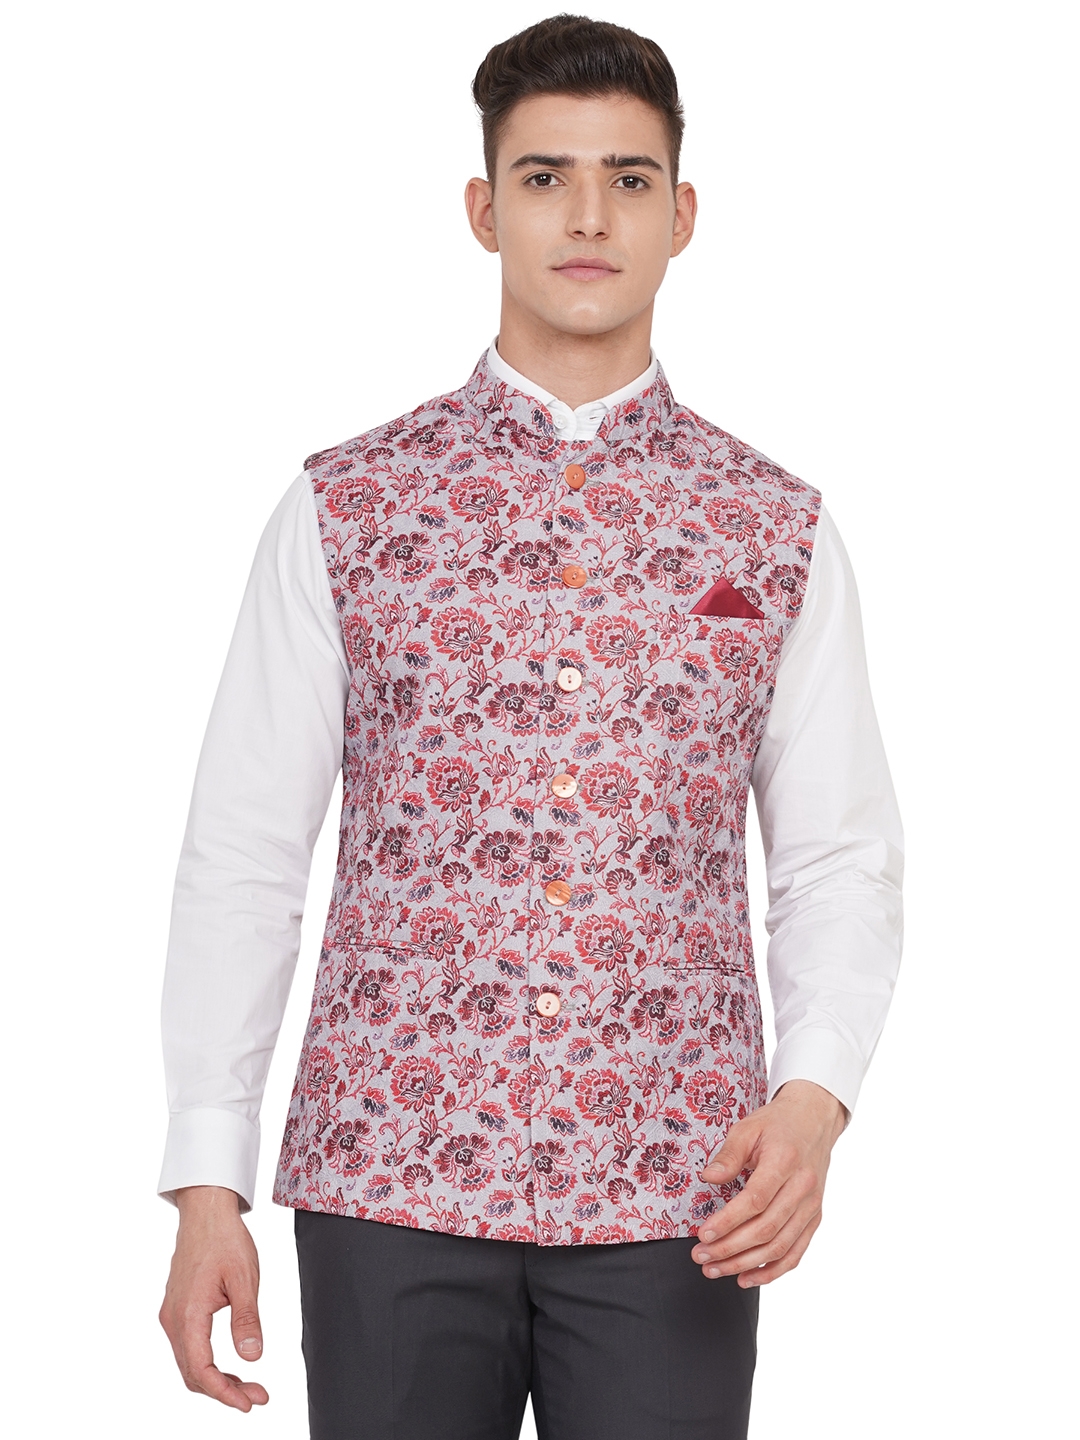 TFX 481-D GREY RED FLORAL PRINT